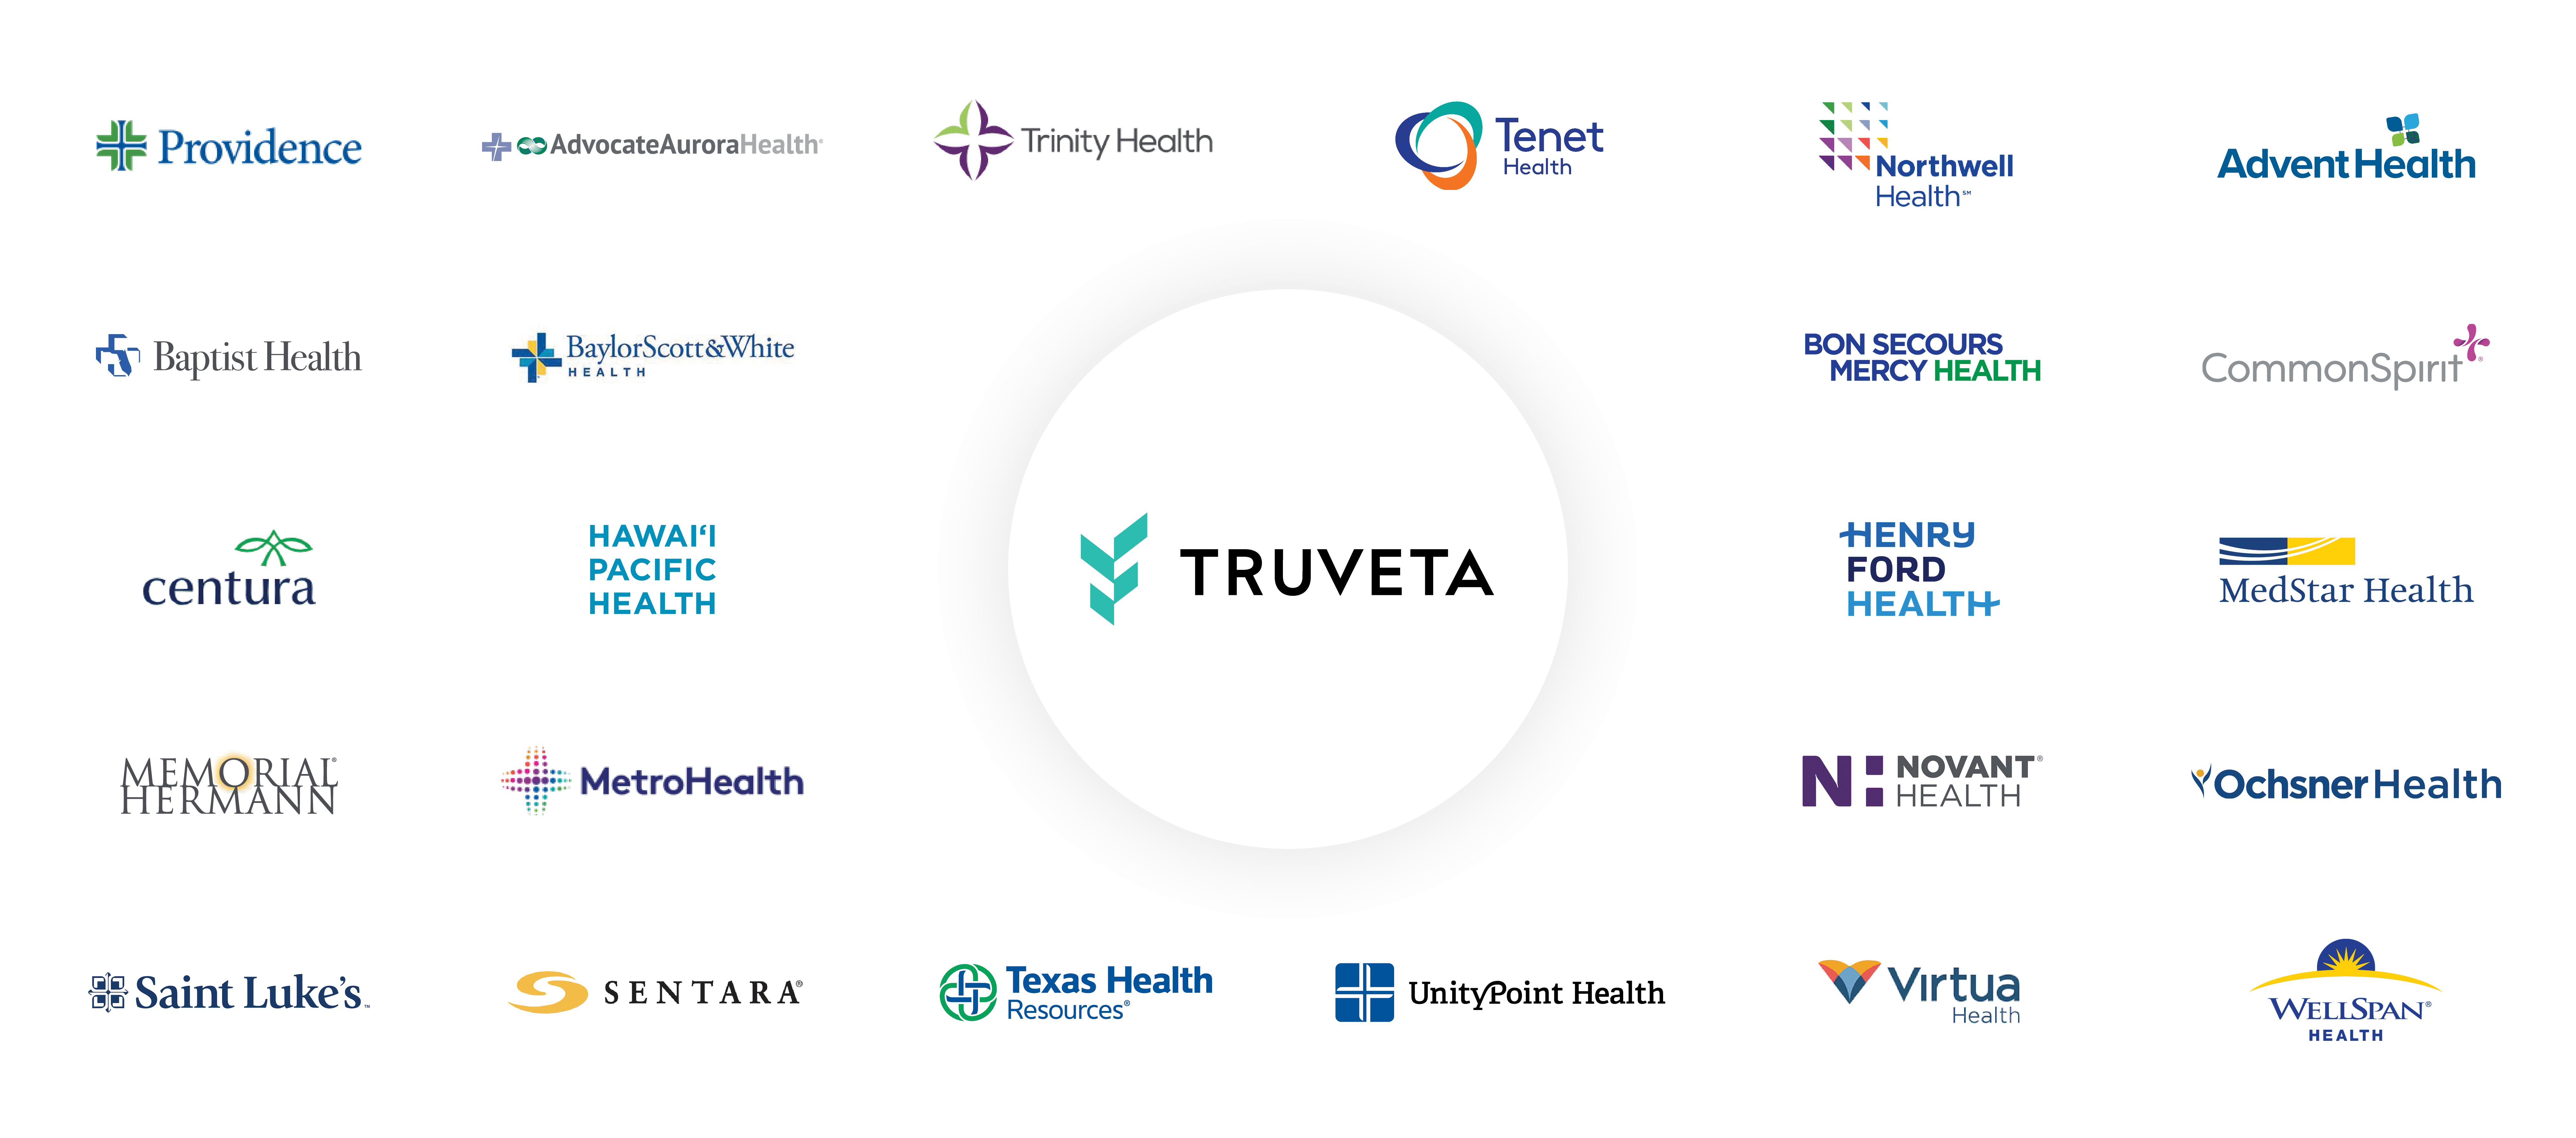 CDC Awards Truveta Real-World Data Contract to Study COVID, Maternal Health, Pediatric Care